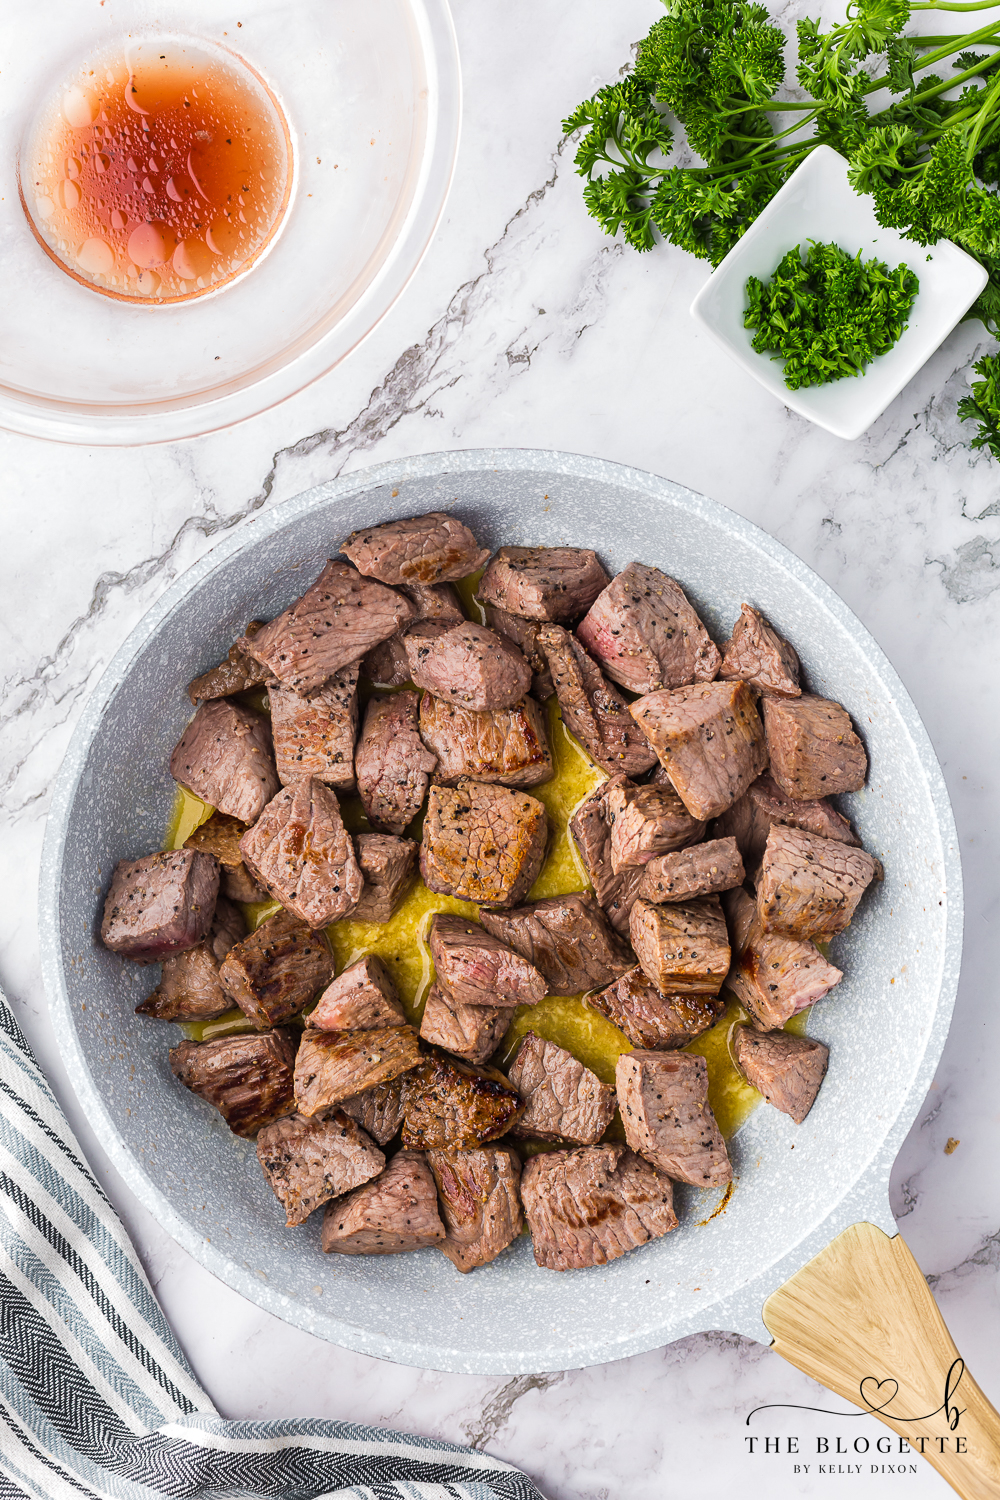 Cooking steak cubes in melted butter and garlic